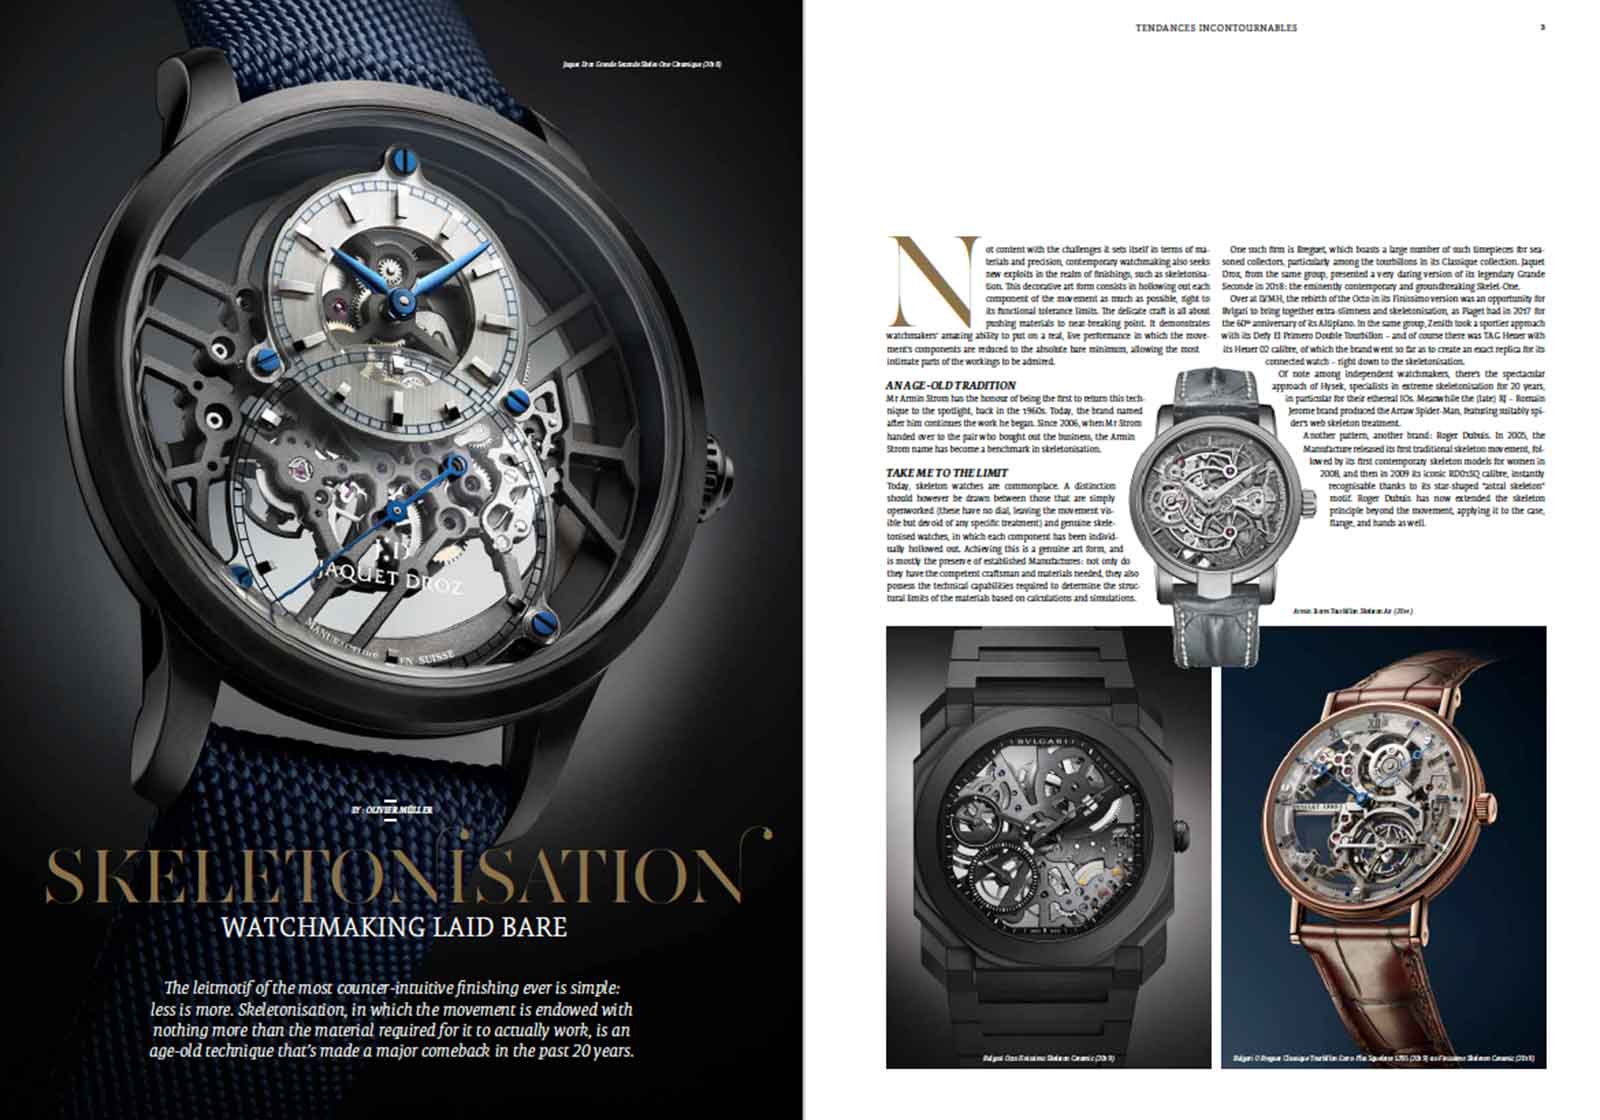 Love watches? Here’s the book for you